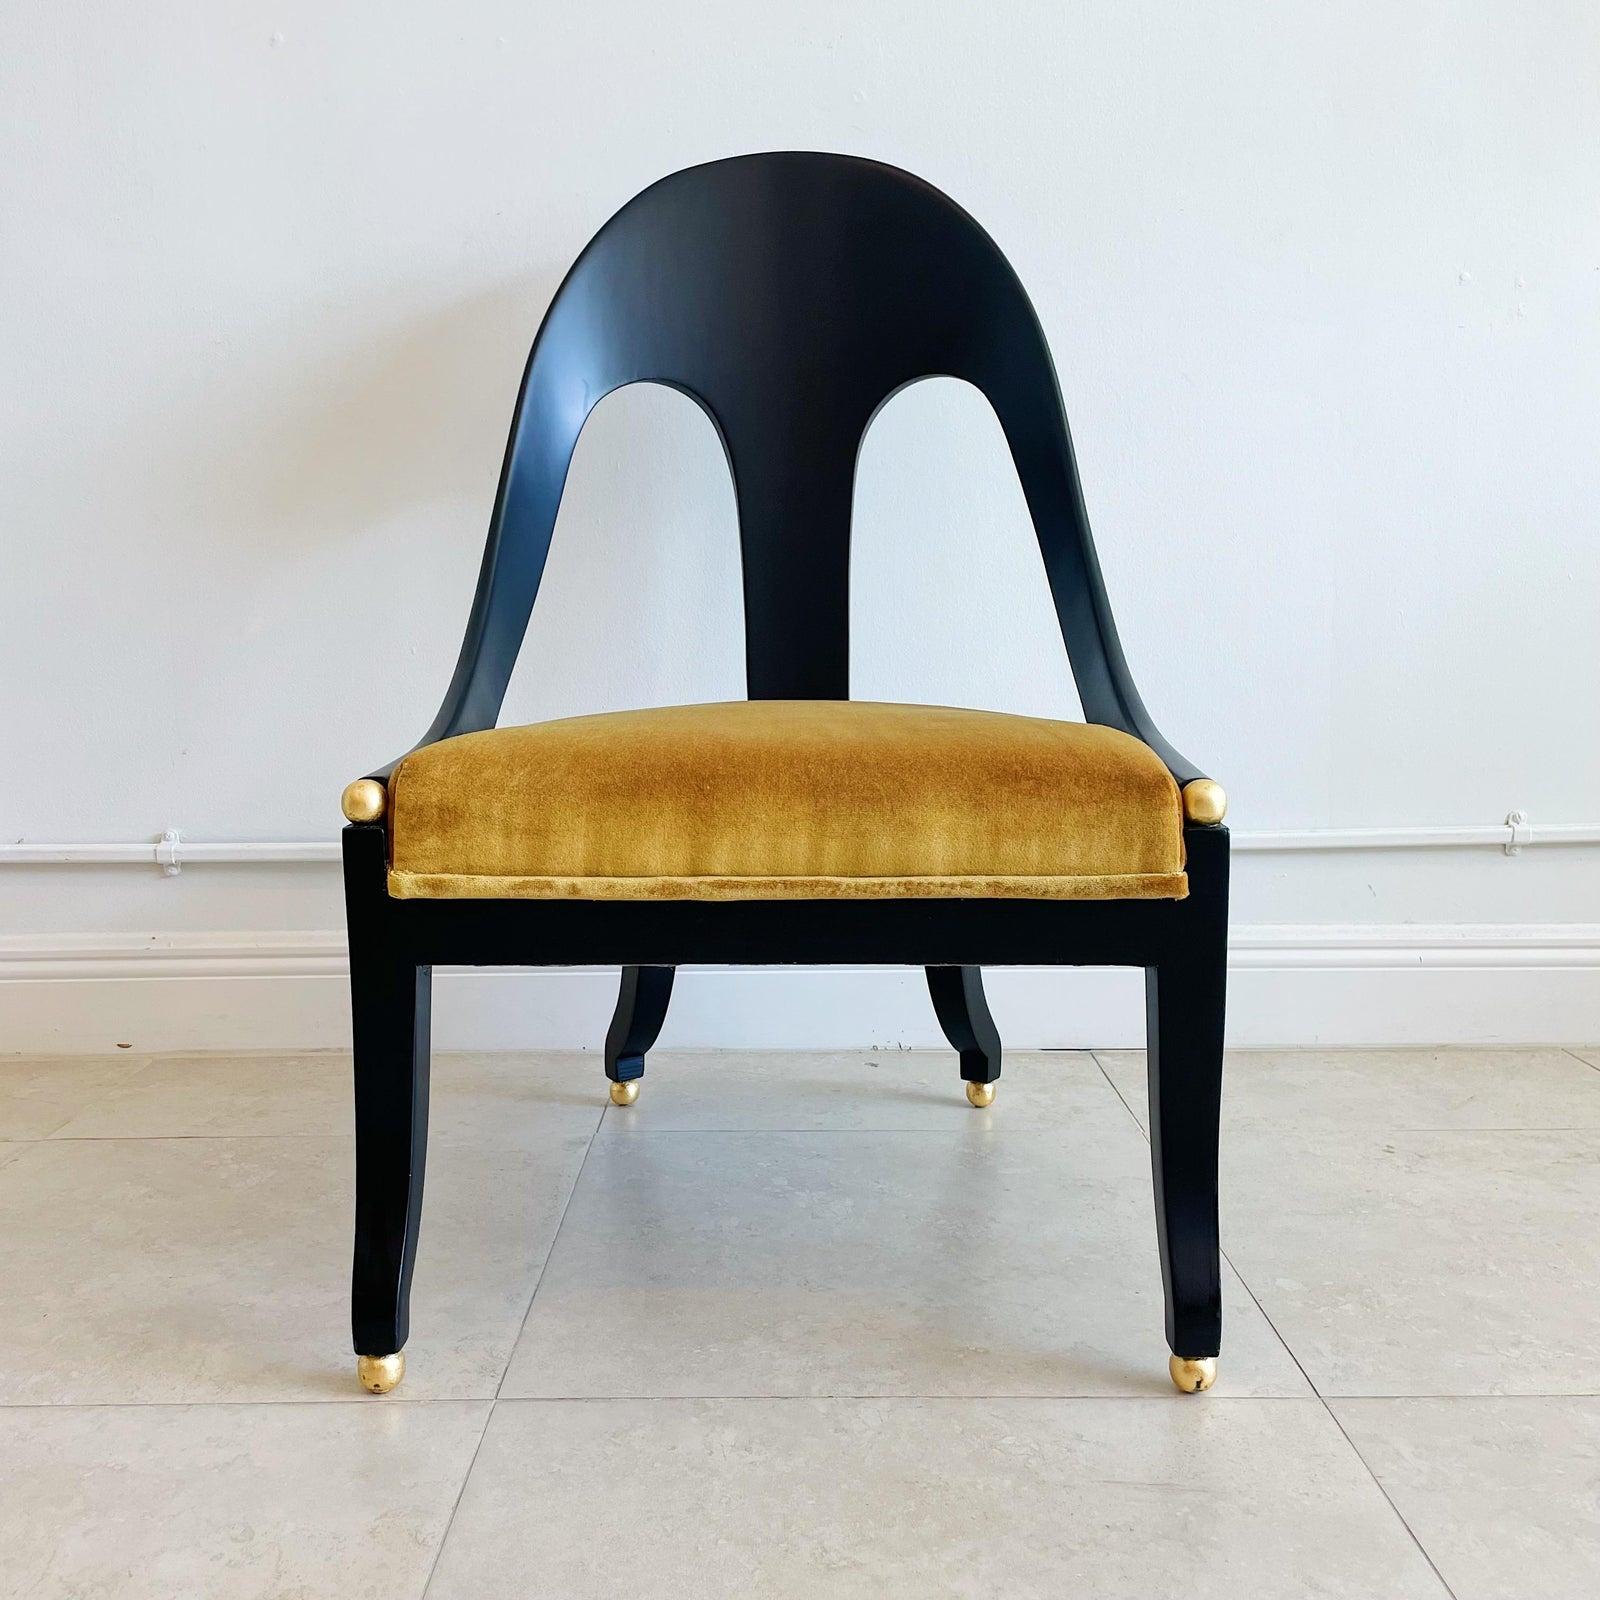 Delightful pair of slipper chairs by Michael Taylor for Baker Furniture Company. Newly refinished in 25% matte black lacquer with gold leaf accent balls on the feet and end of the arm rests. Recently upholstered in Mustard velvet over new foam and